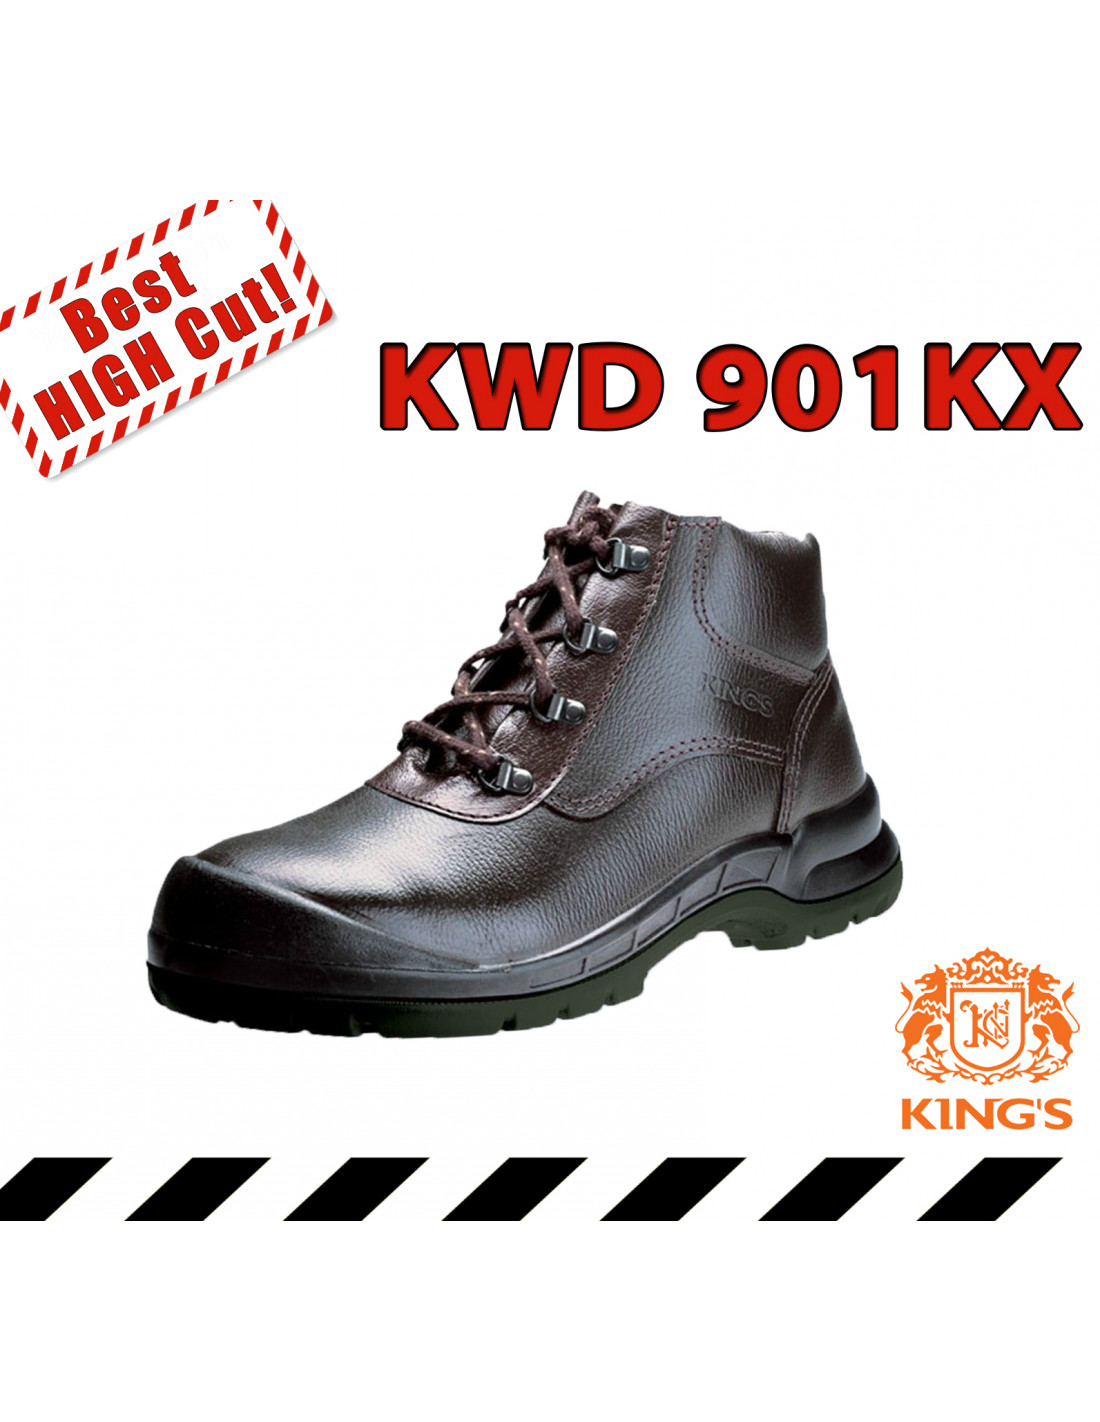 kings brand safety shoes